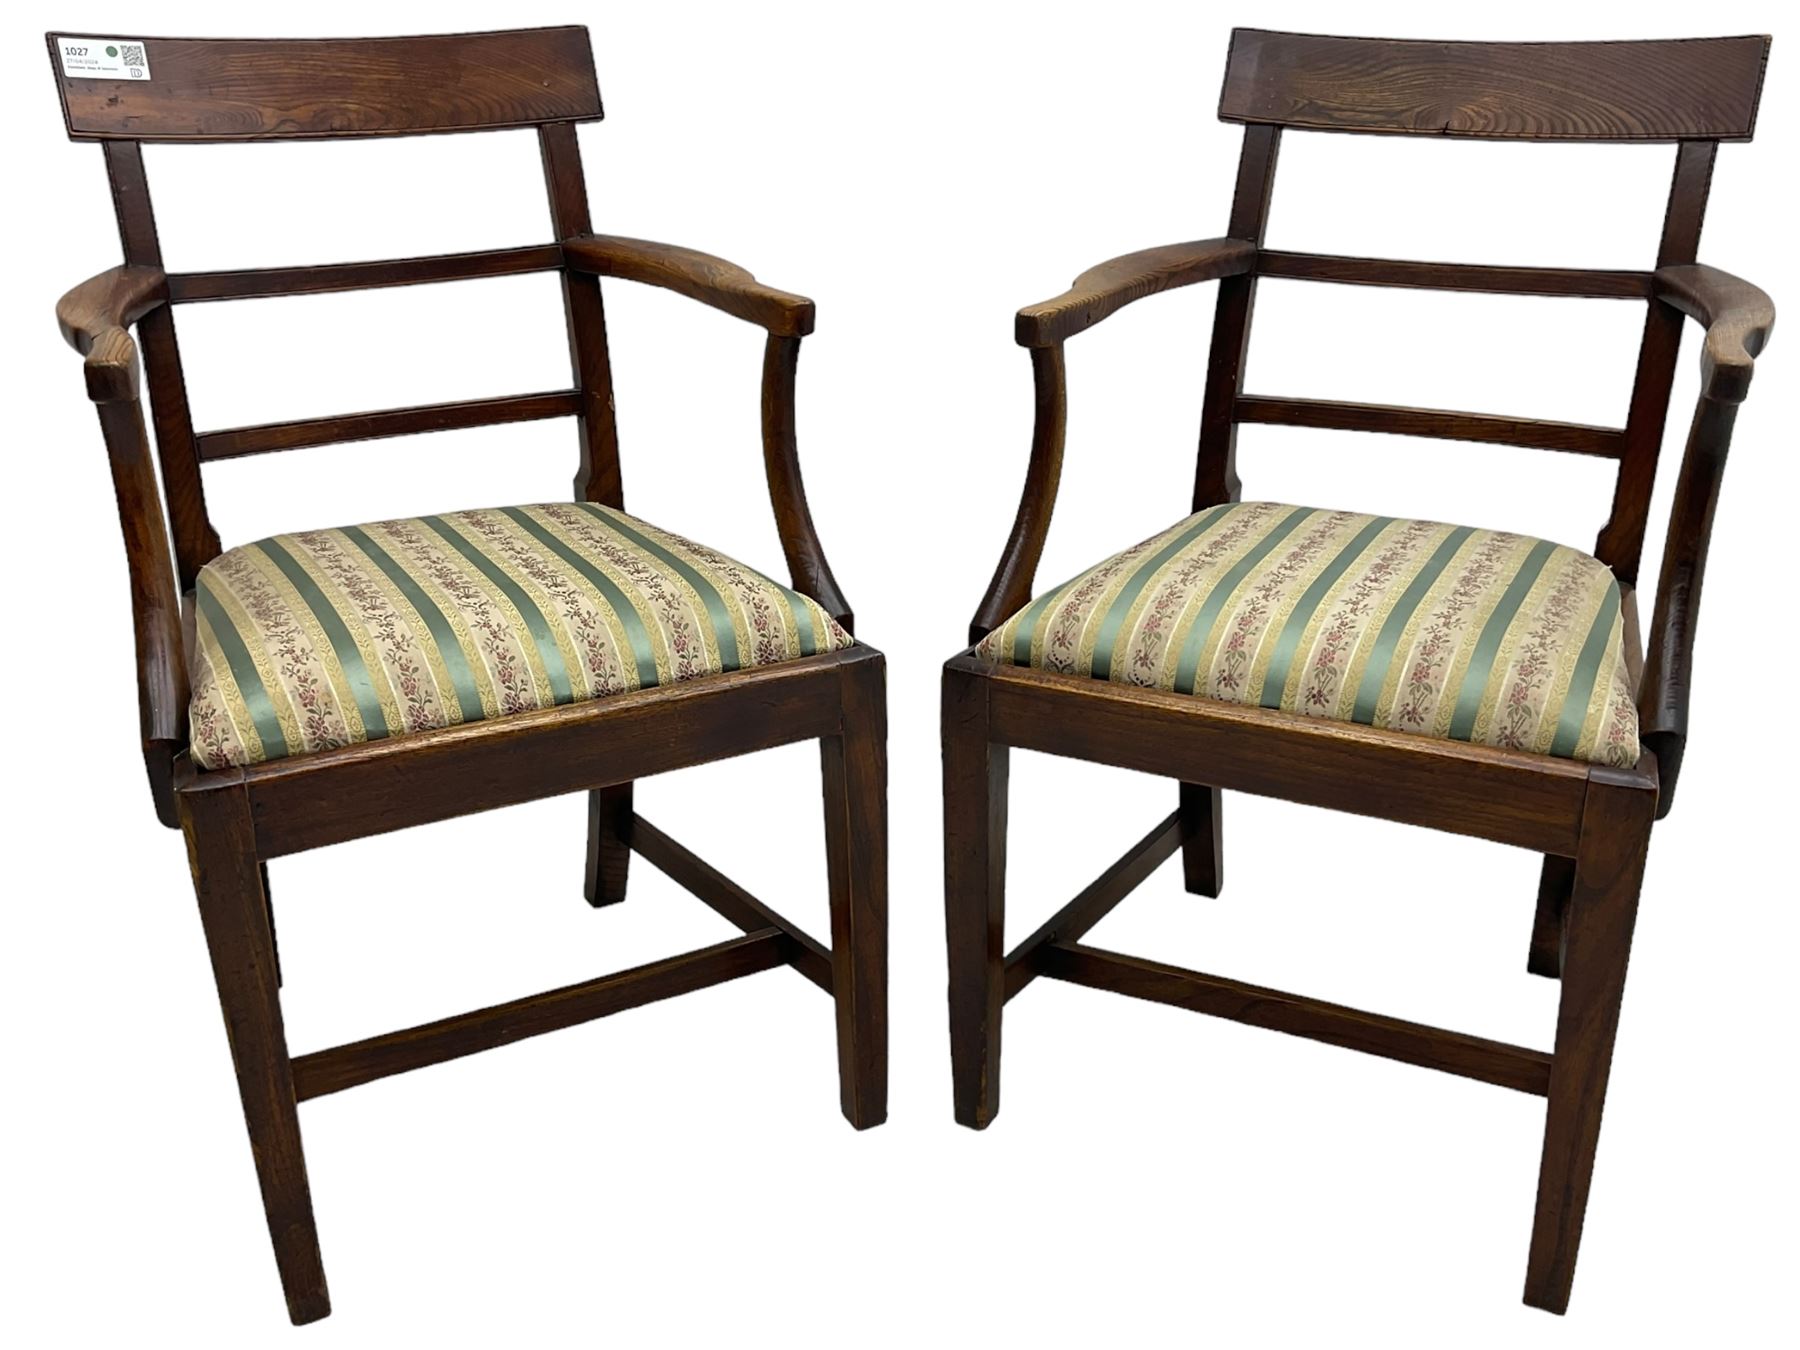 Pair of 19th century elm elbow chairs - Image 6 of 7